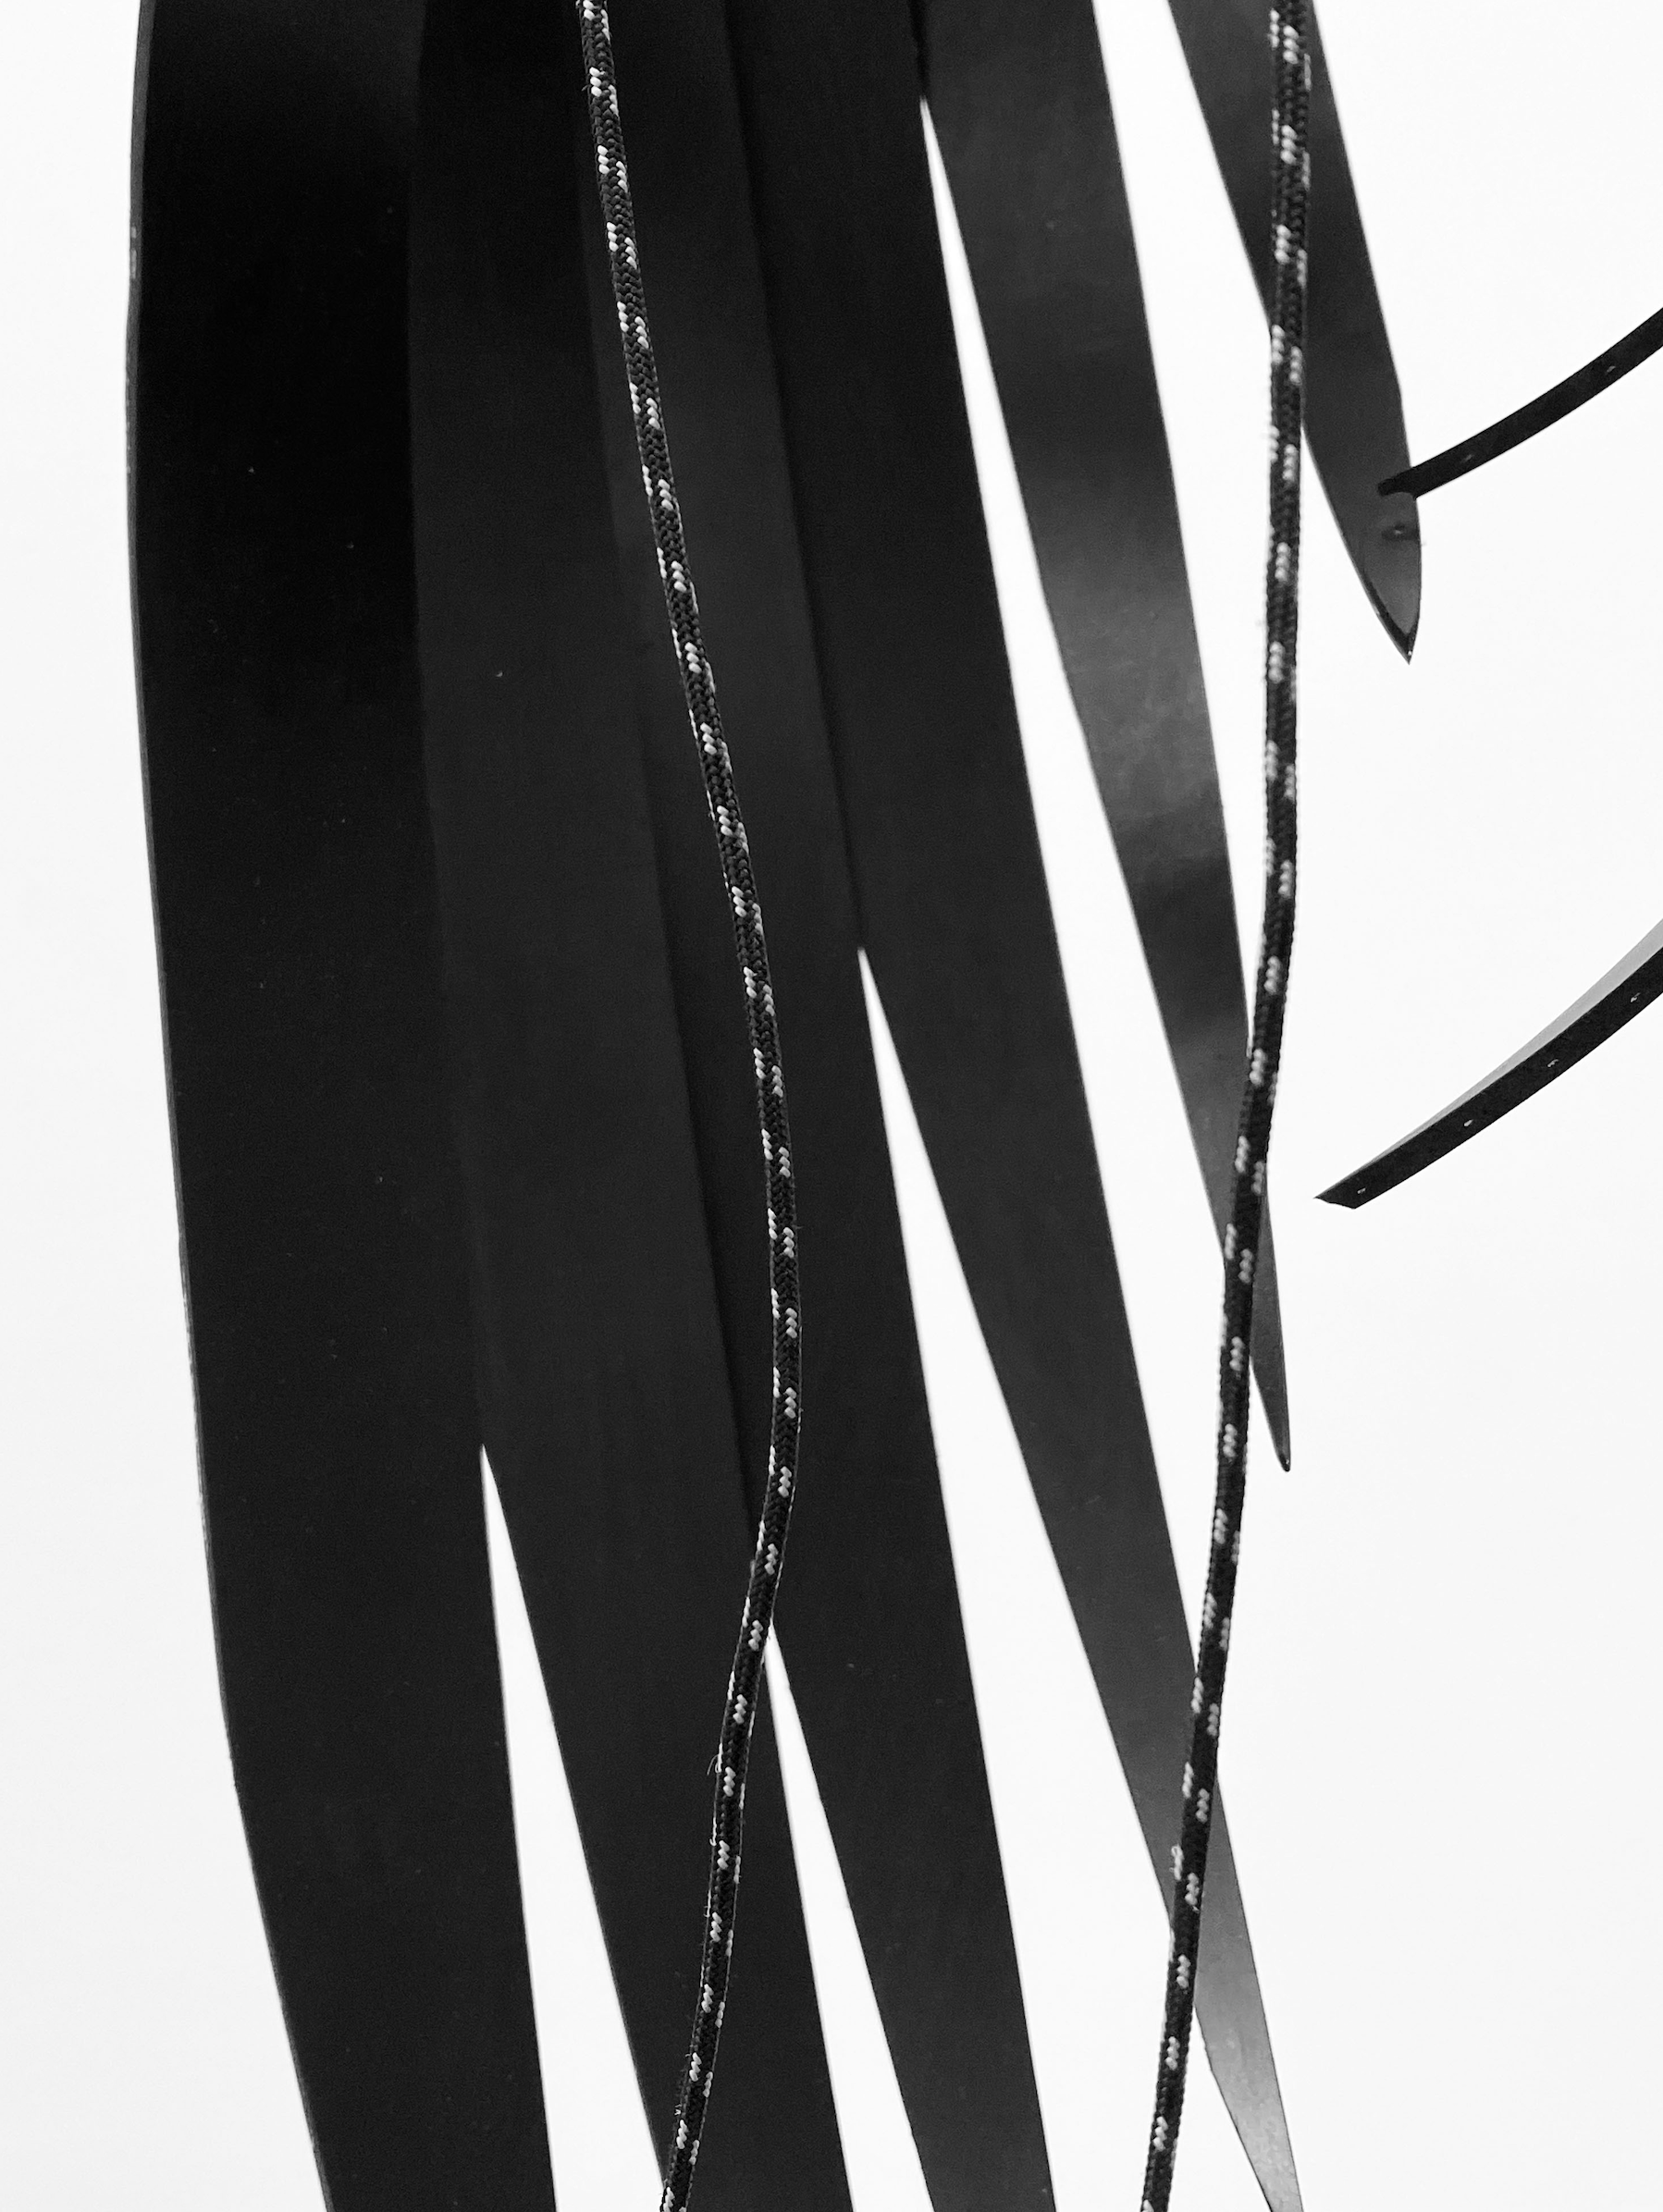 Whip Palm (Detail), 2023, natural rubber, metal hardware, sports rope, variable dimensions. 